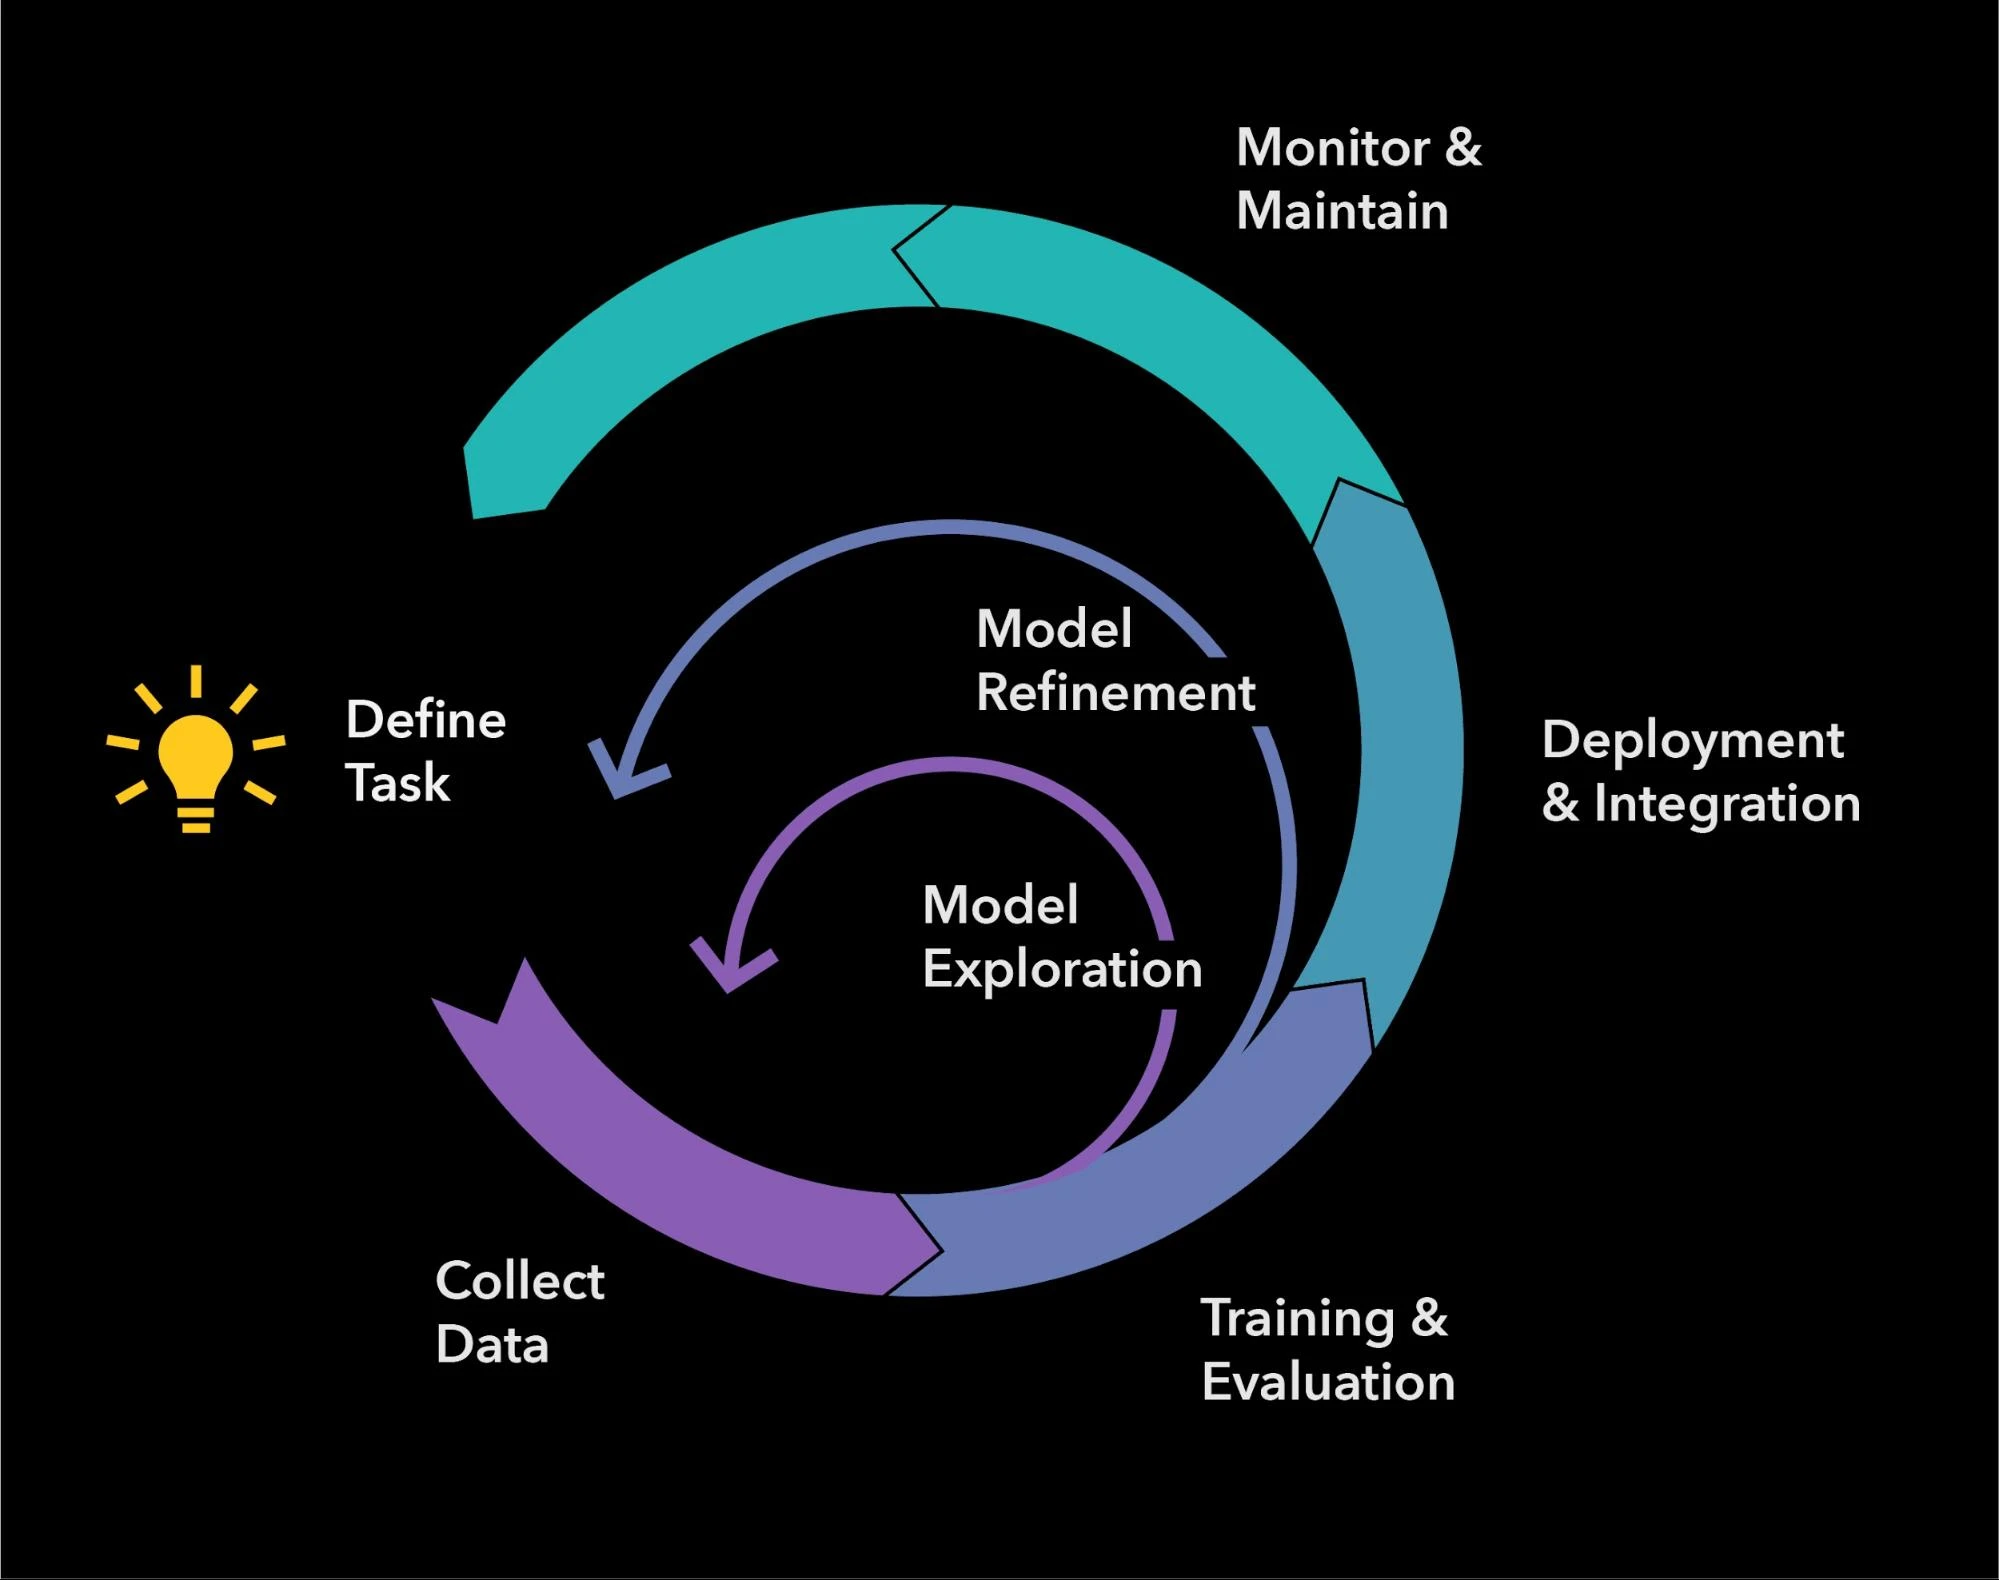 The Model Development Lifecycle (MDLC) has elements of the typical software engineering workflow, but also unique data and experimentation elements. To start, you define your task, then collect and label data for your task, then train, refine and evaluate your model(s). When you are happy, deploy the winning model and then monitor, maintain, and constantly retrain your model in production.